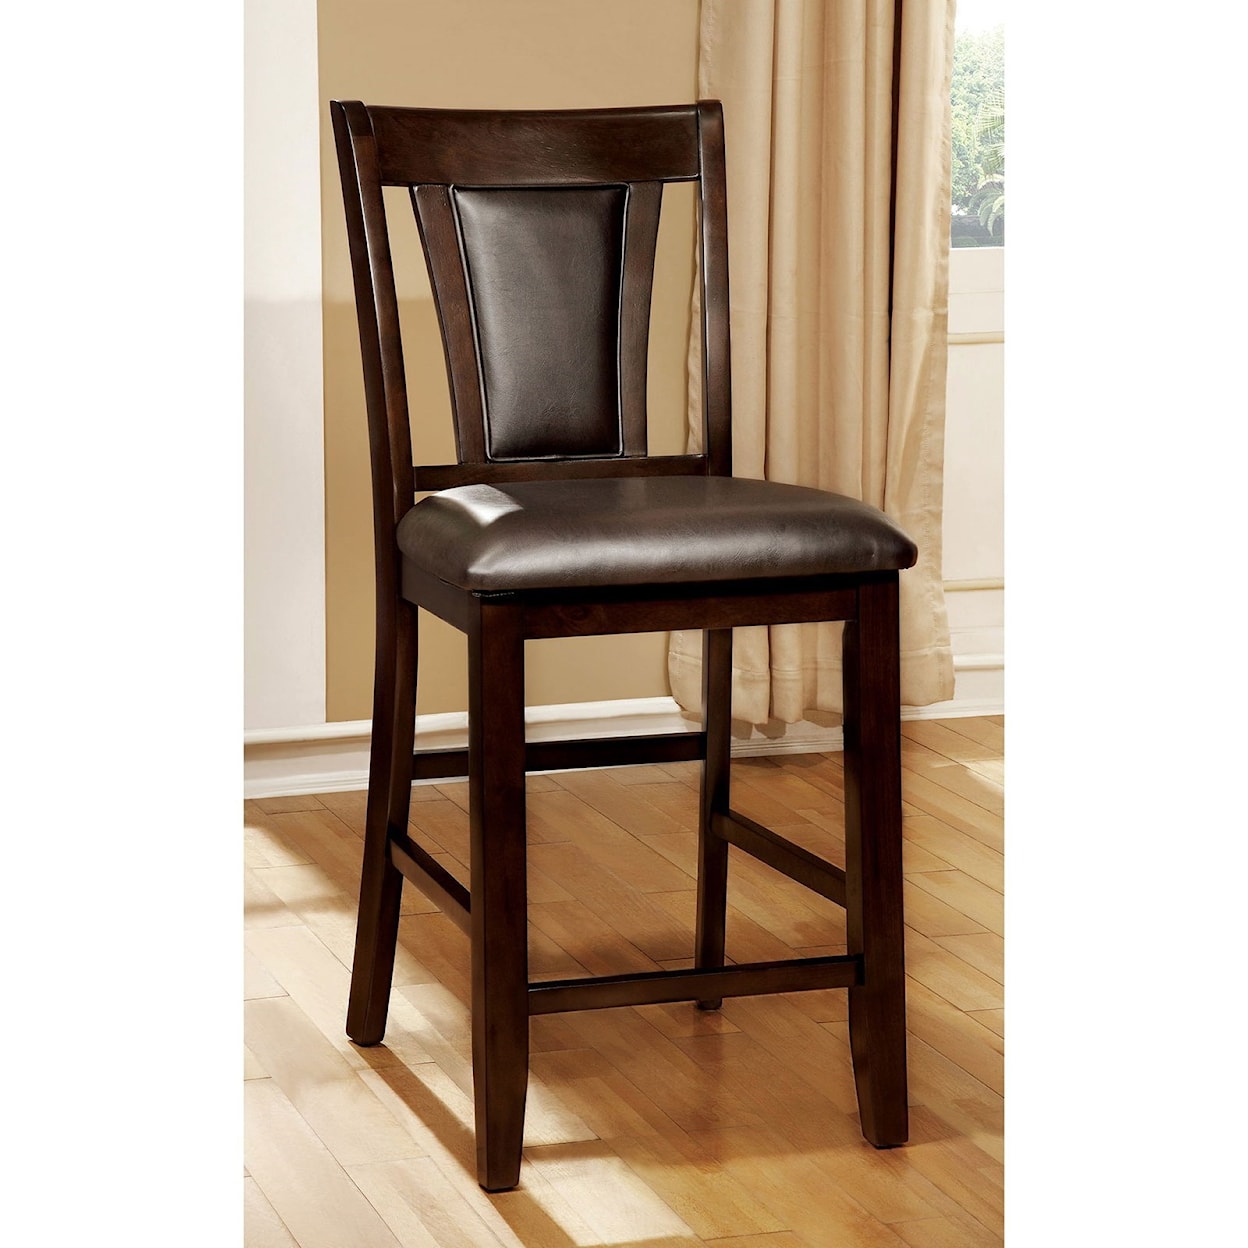 Furniture of America Brent Counter Height Chair